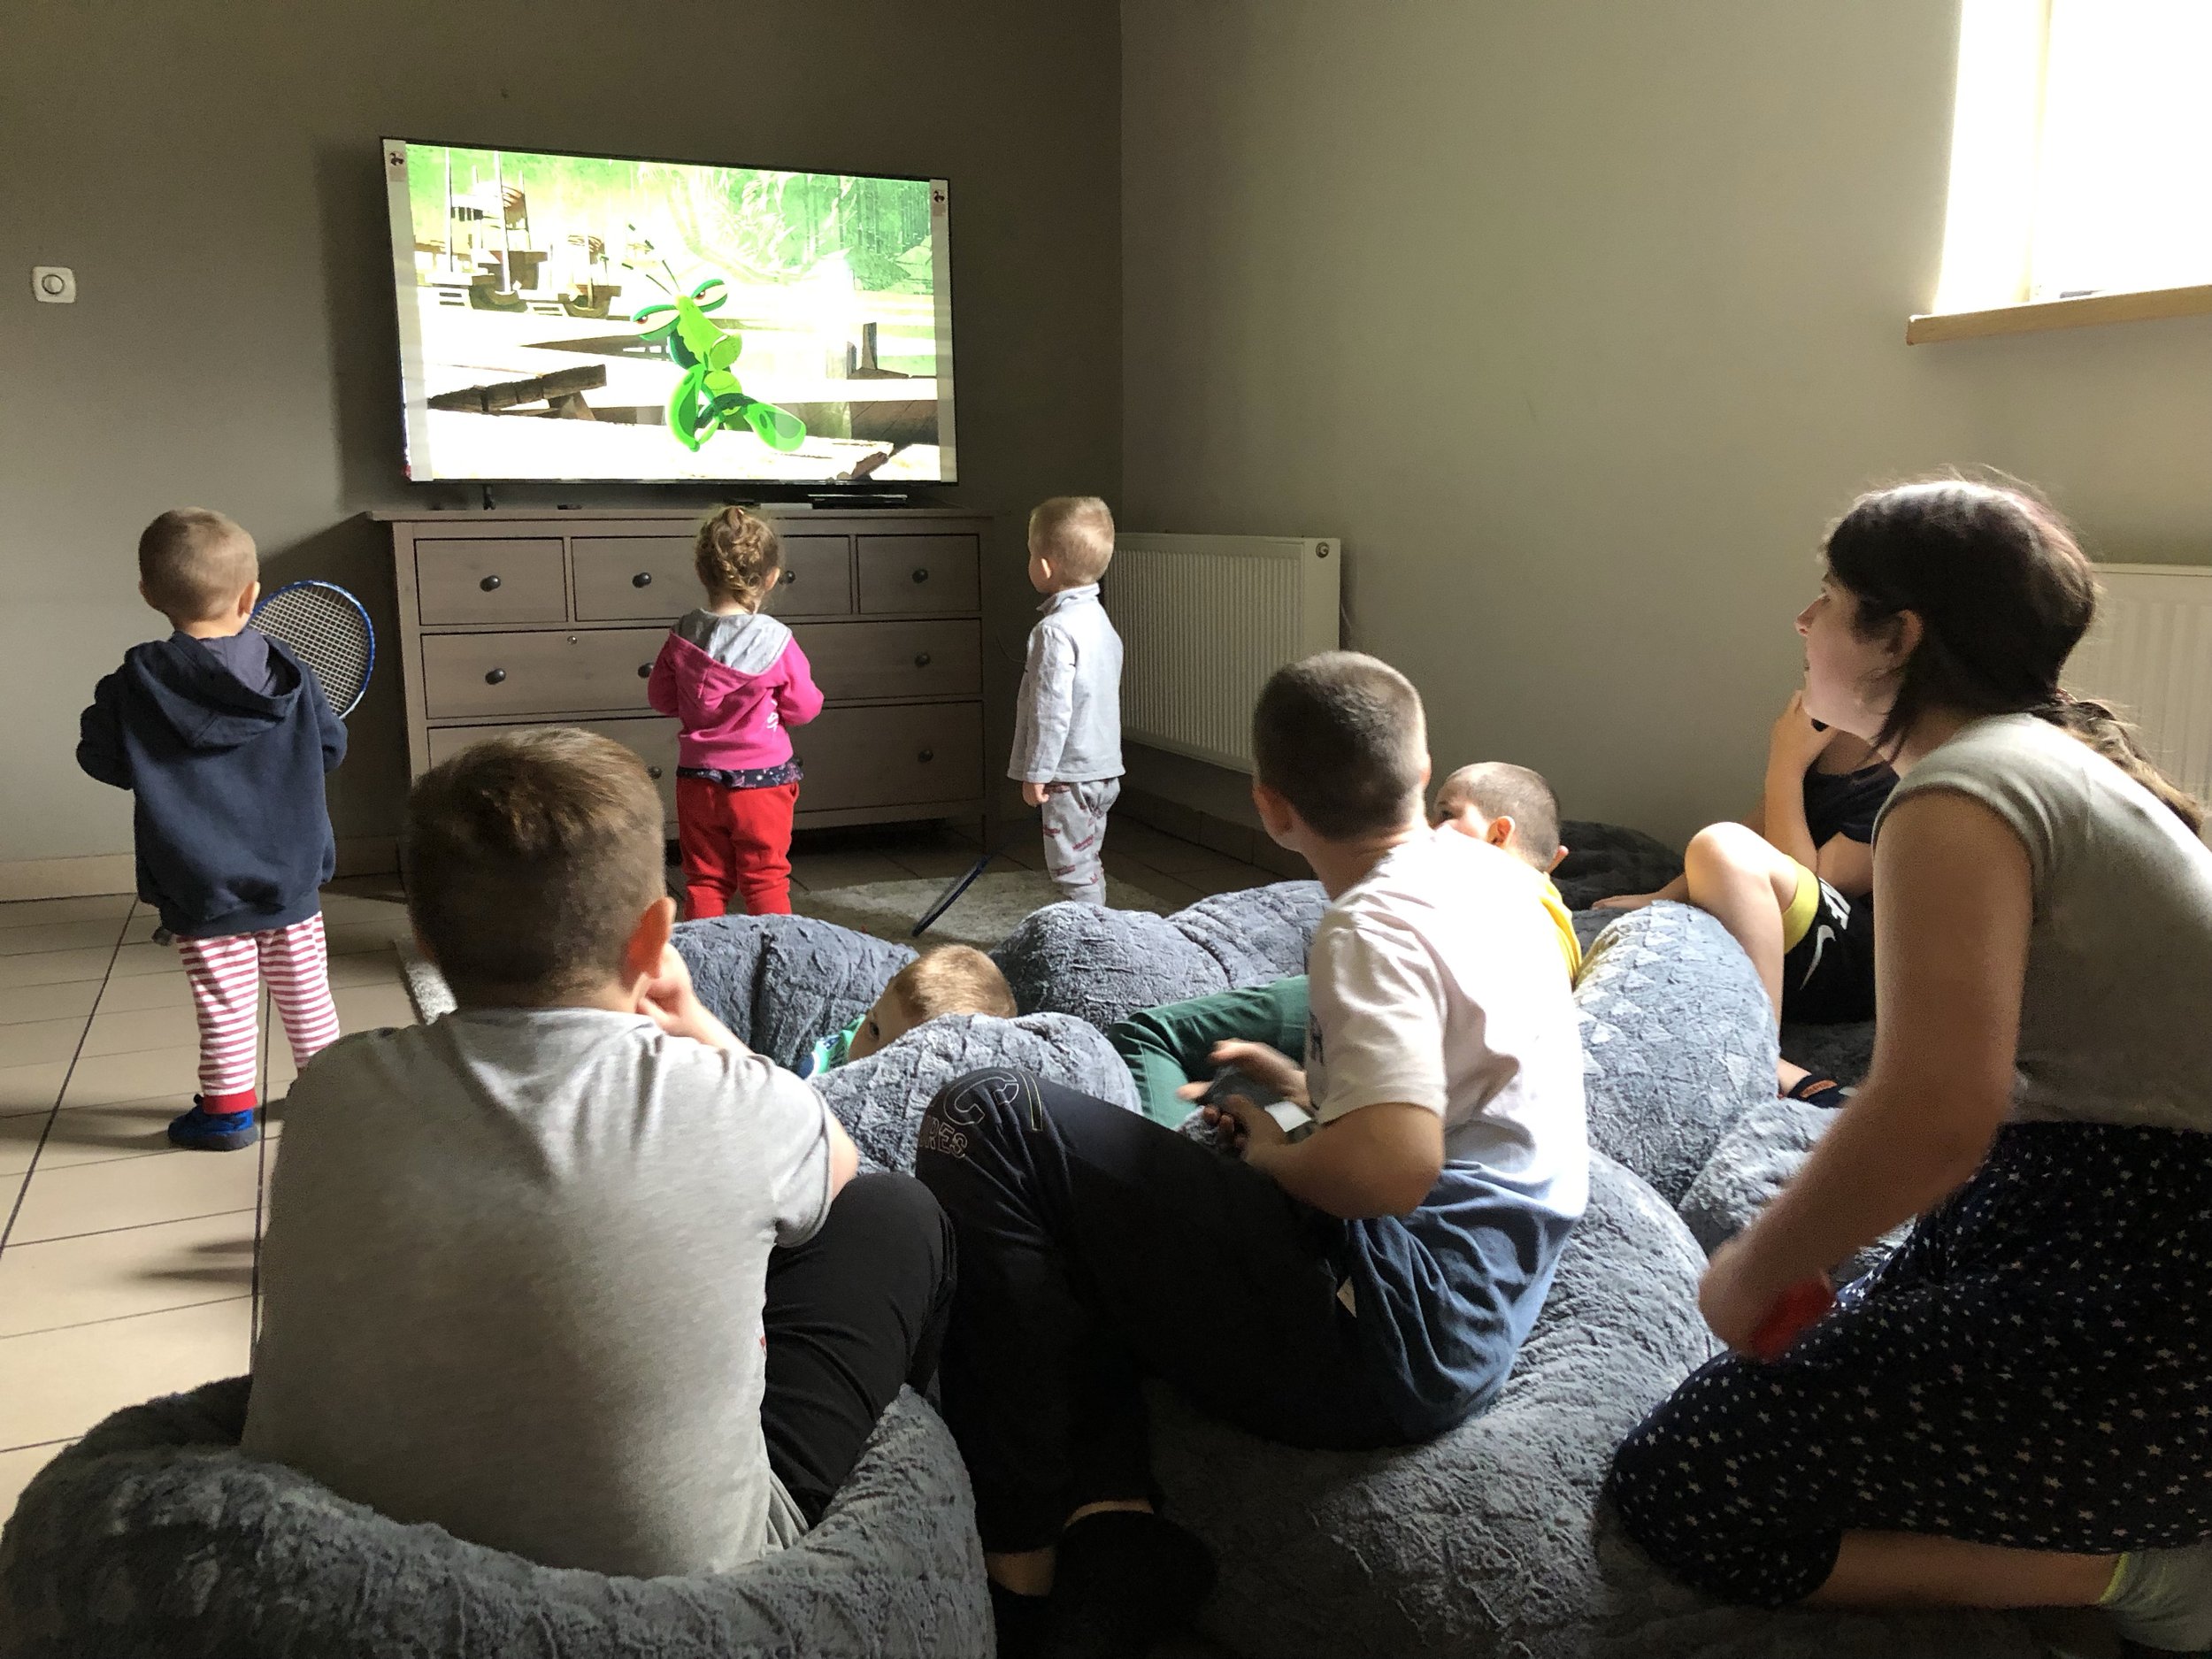 Children watch each other playing video games during their off time from online school